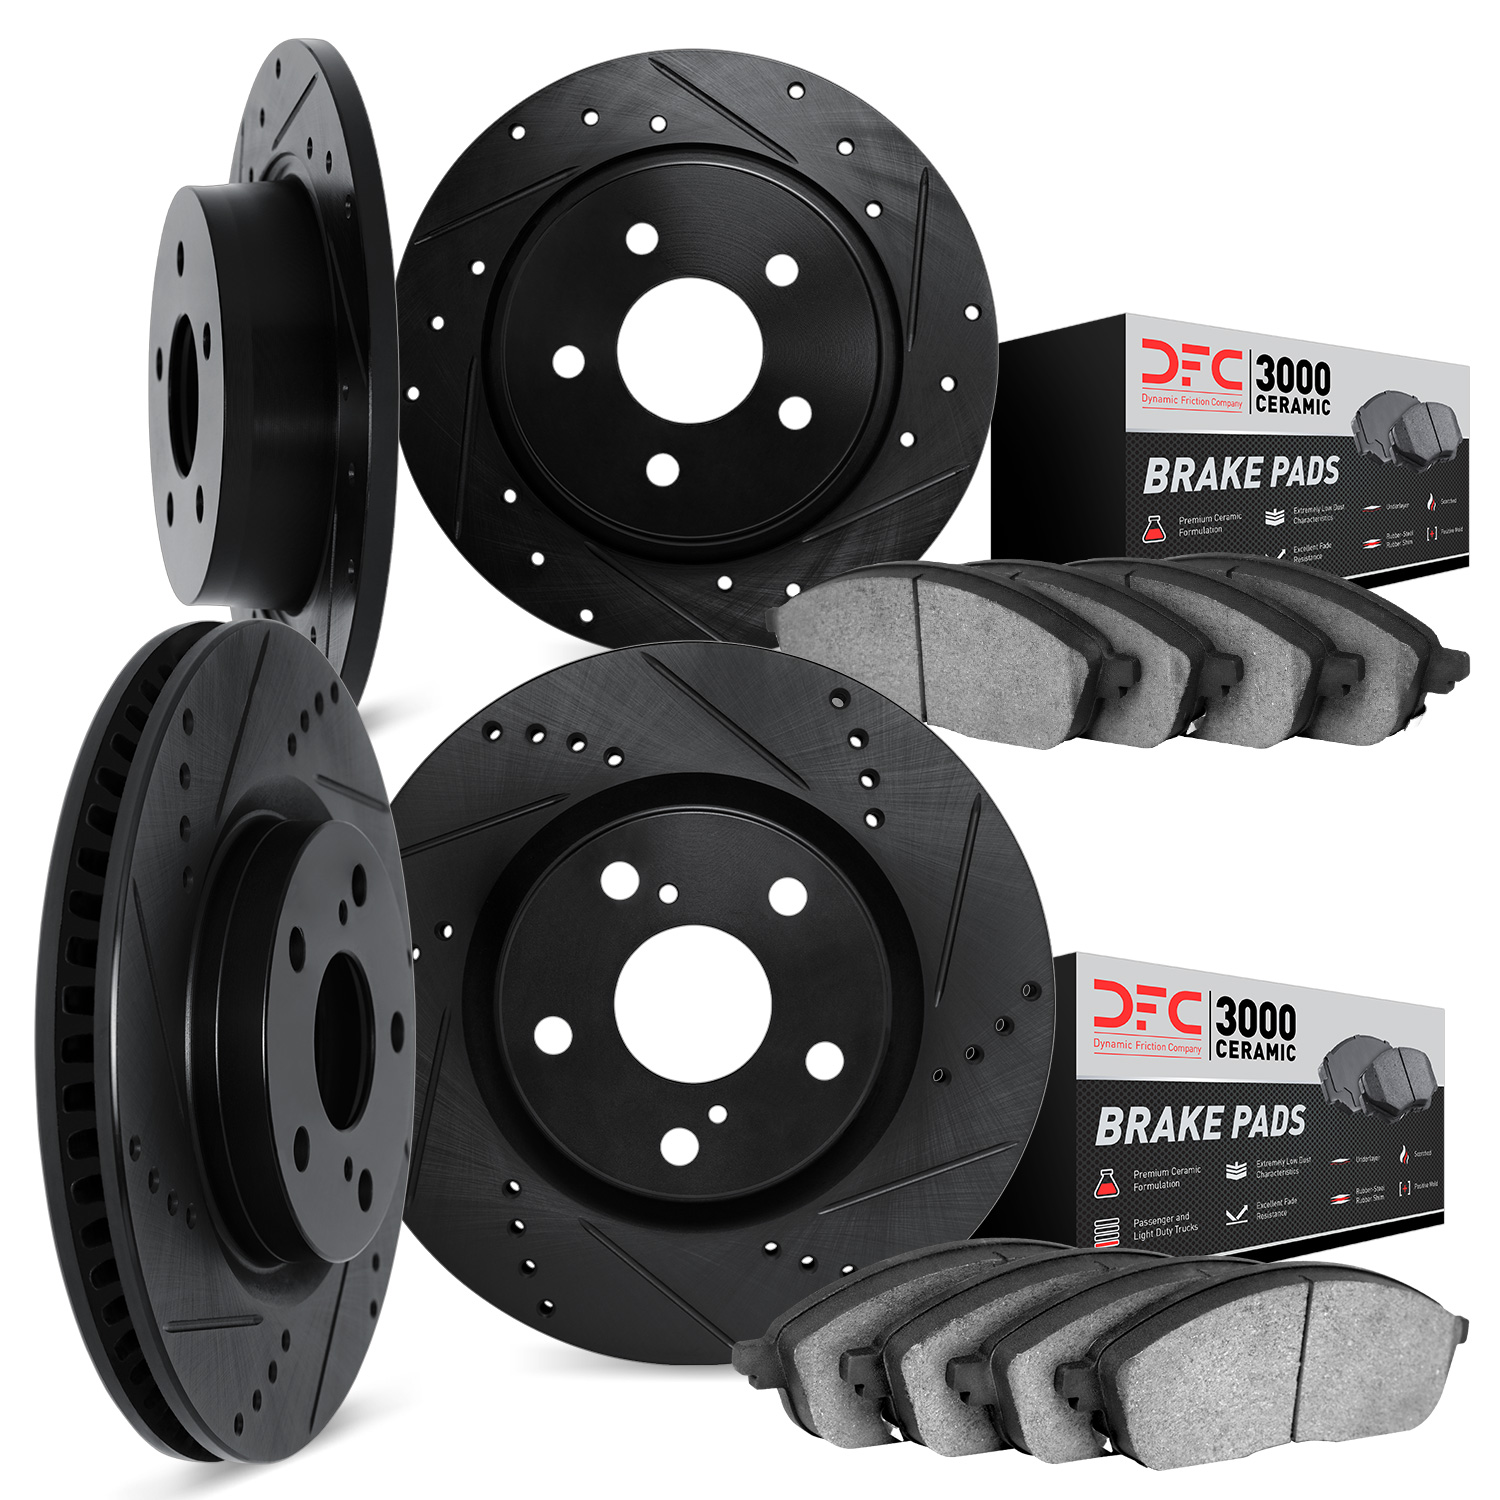 8304-42018 Drilled/Slotted Brake Rotors with 3000-Series Ceramic Brake Pads Kit [Black], Fits Select Mopar, Position: Front and